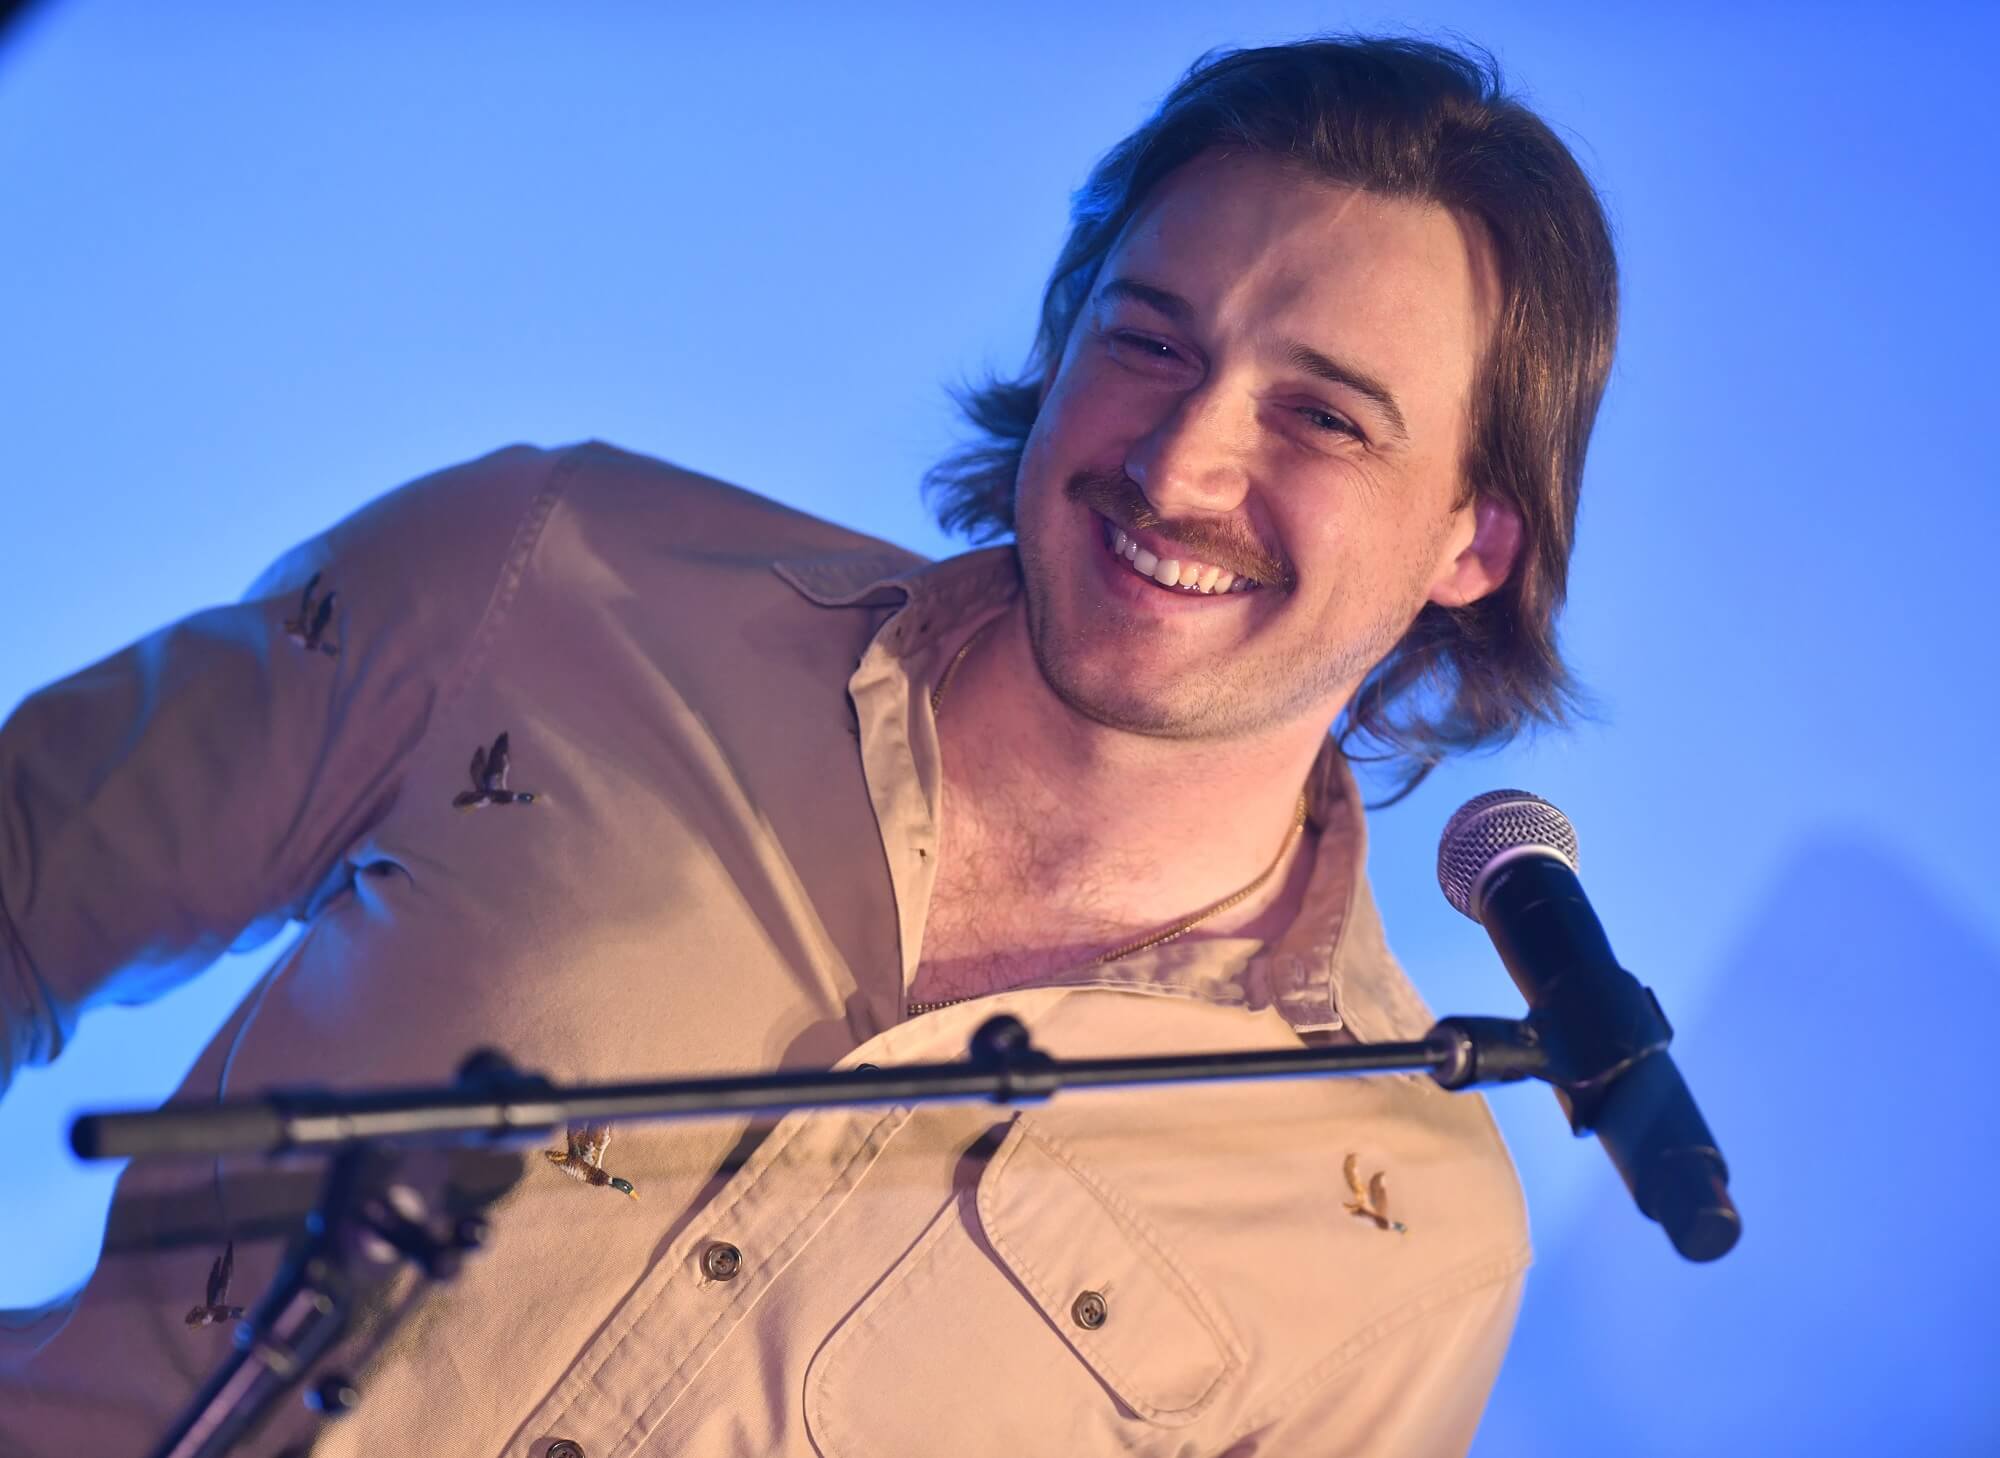 Morgan Wallen smiles in front of a microphone while wearing a brown sihrt